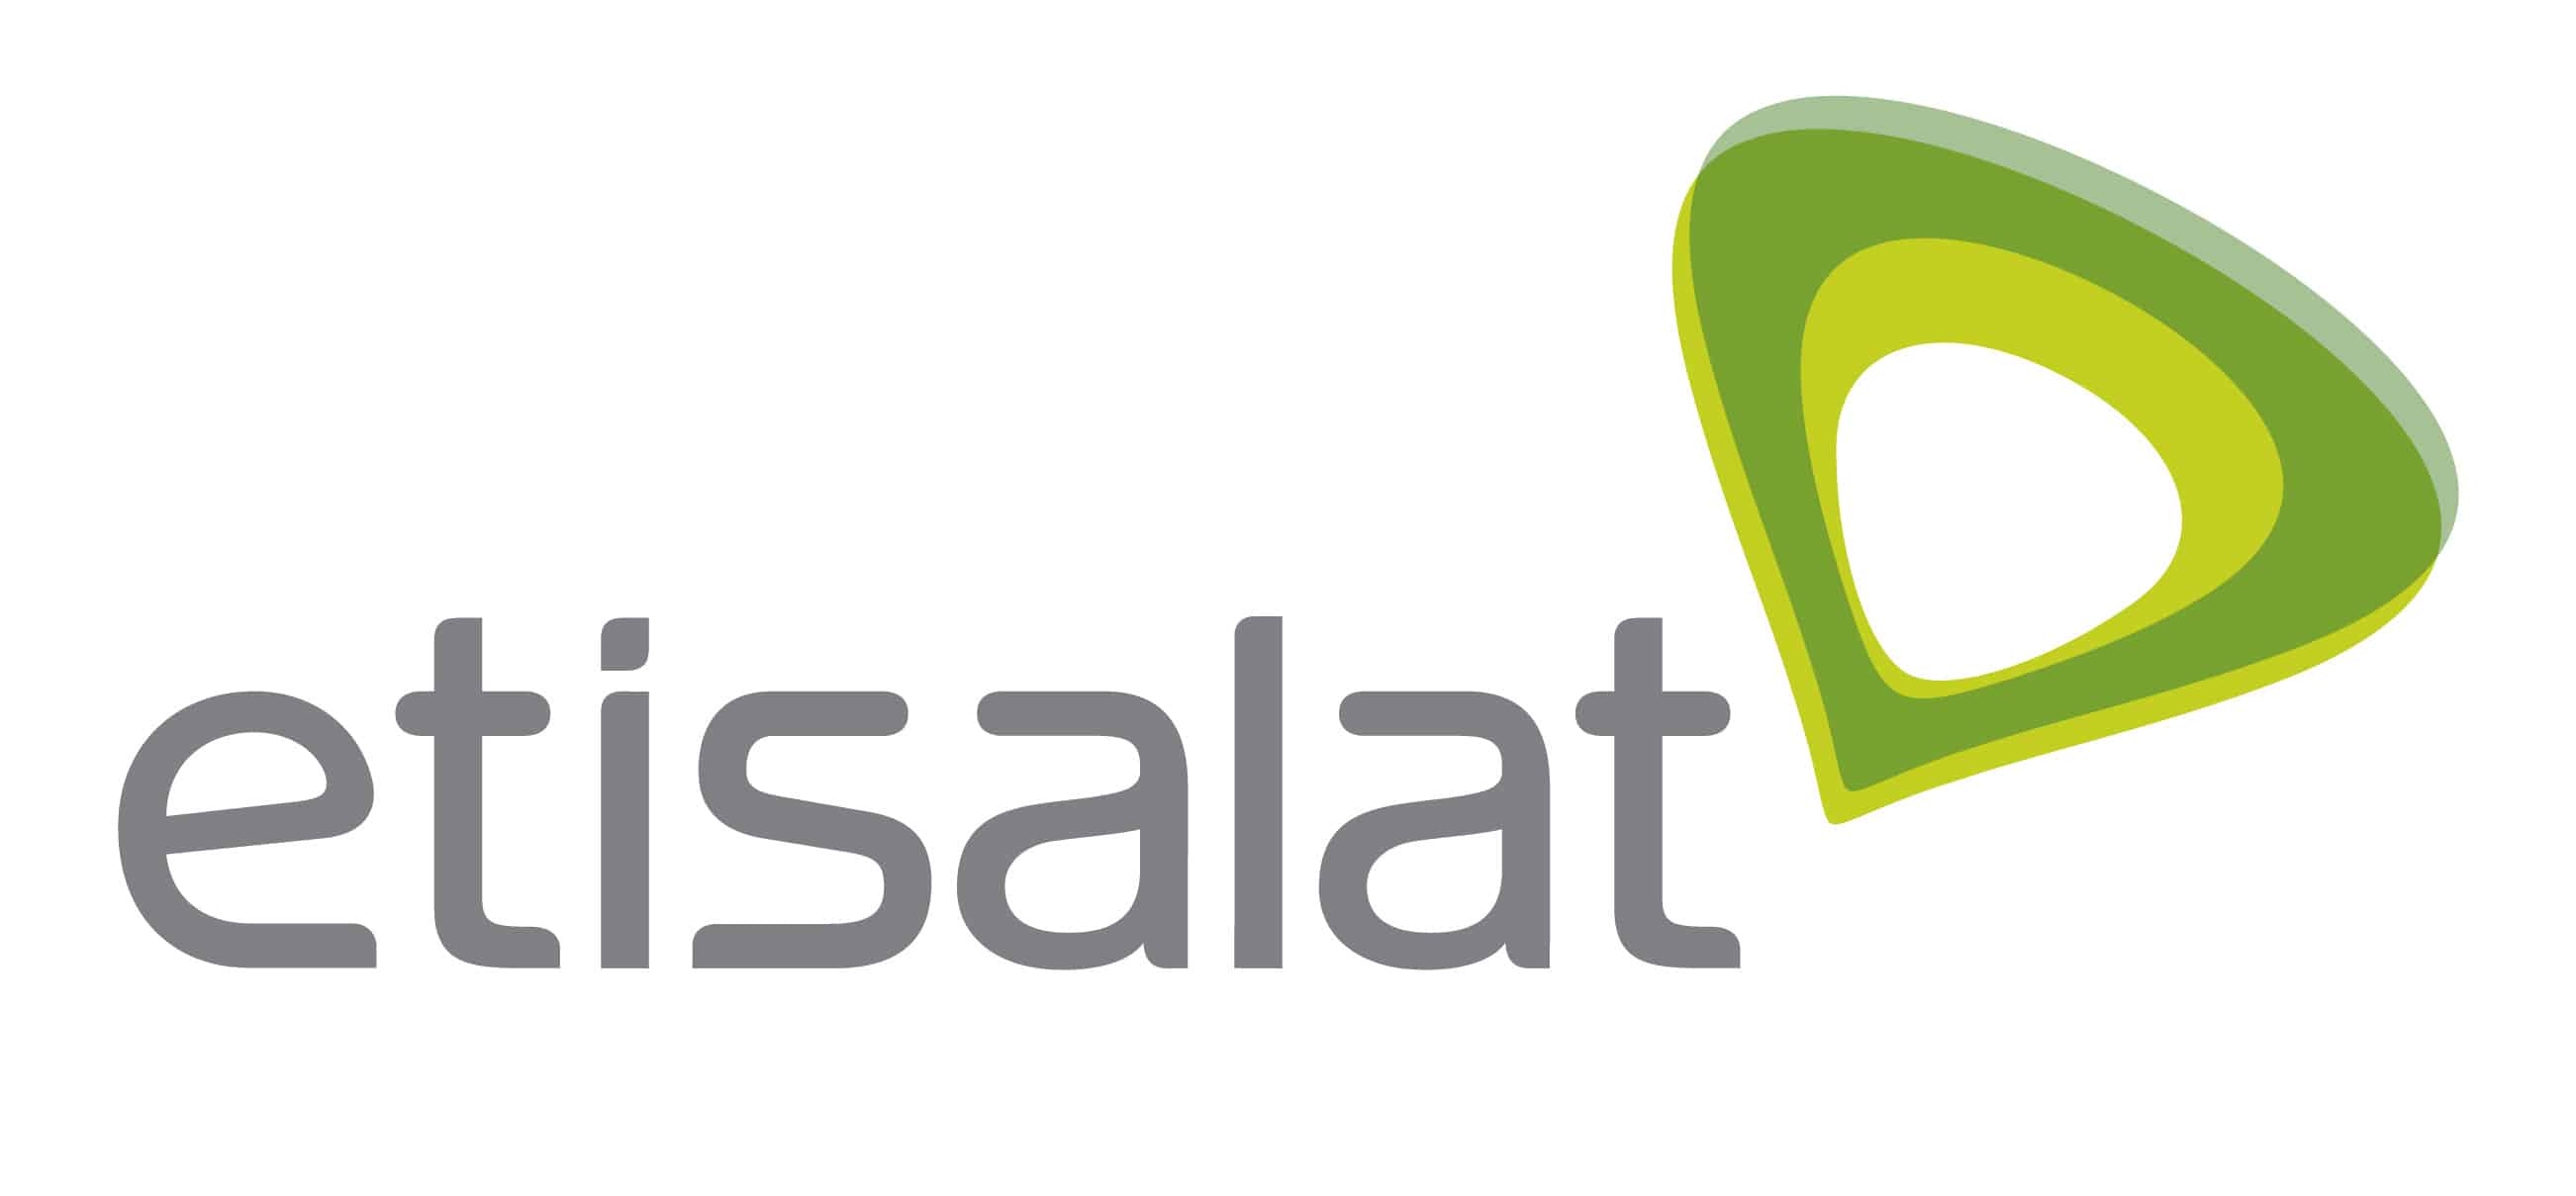 Etisalat data bundles, acvtivation codes and prices